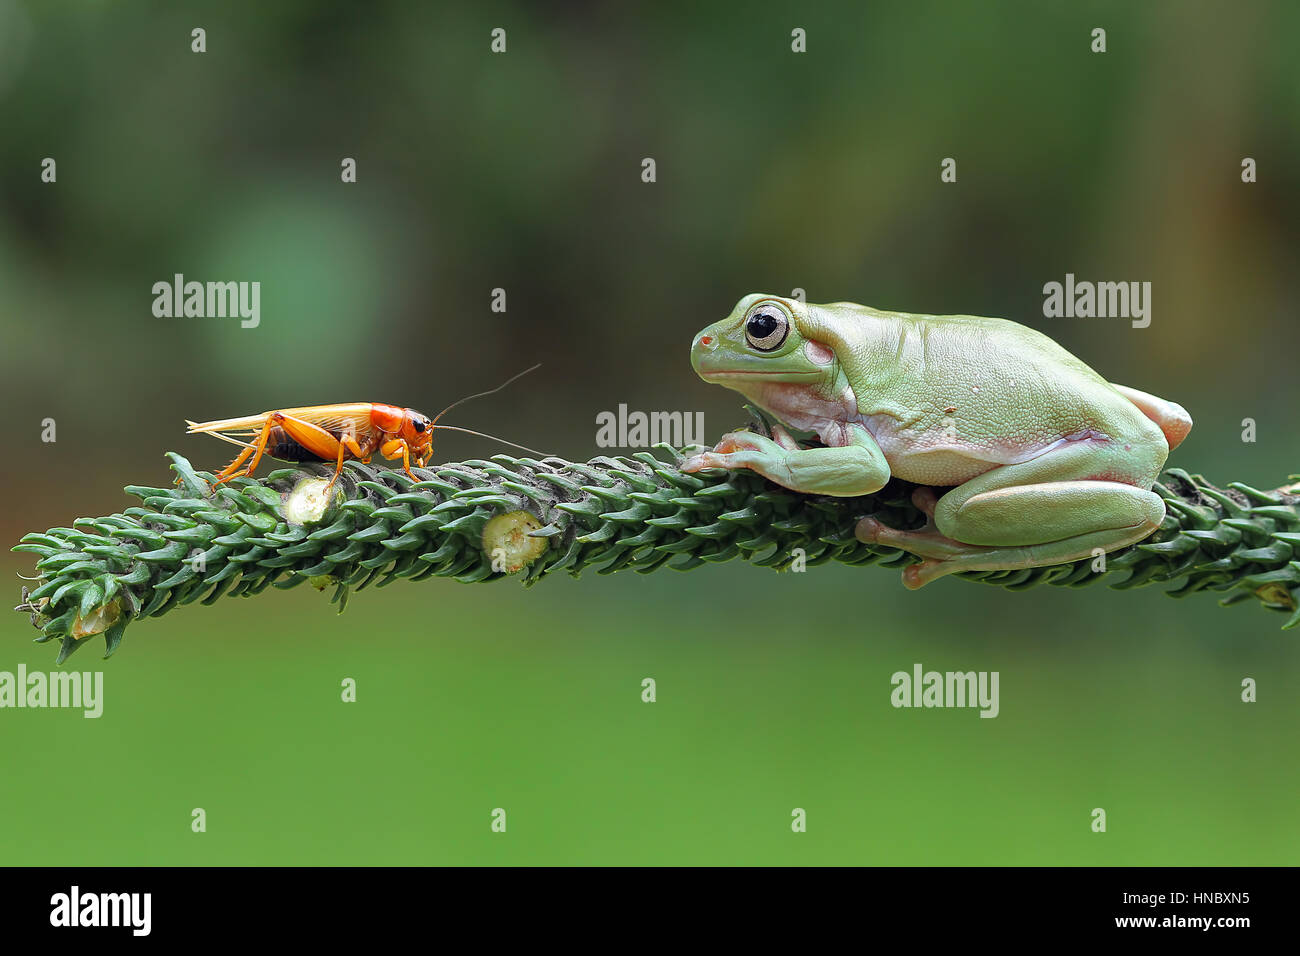 Dumpy tree frog sitting on branch with a grasshopper, Indonesia Stock Photo